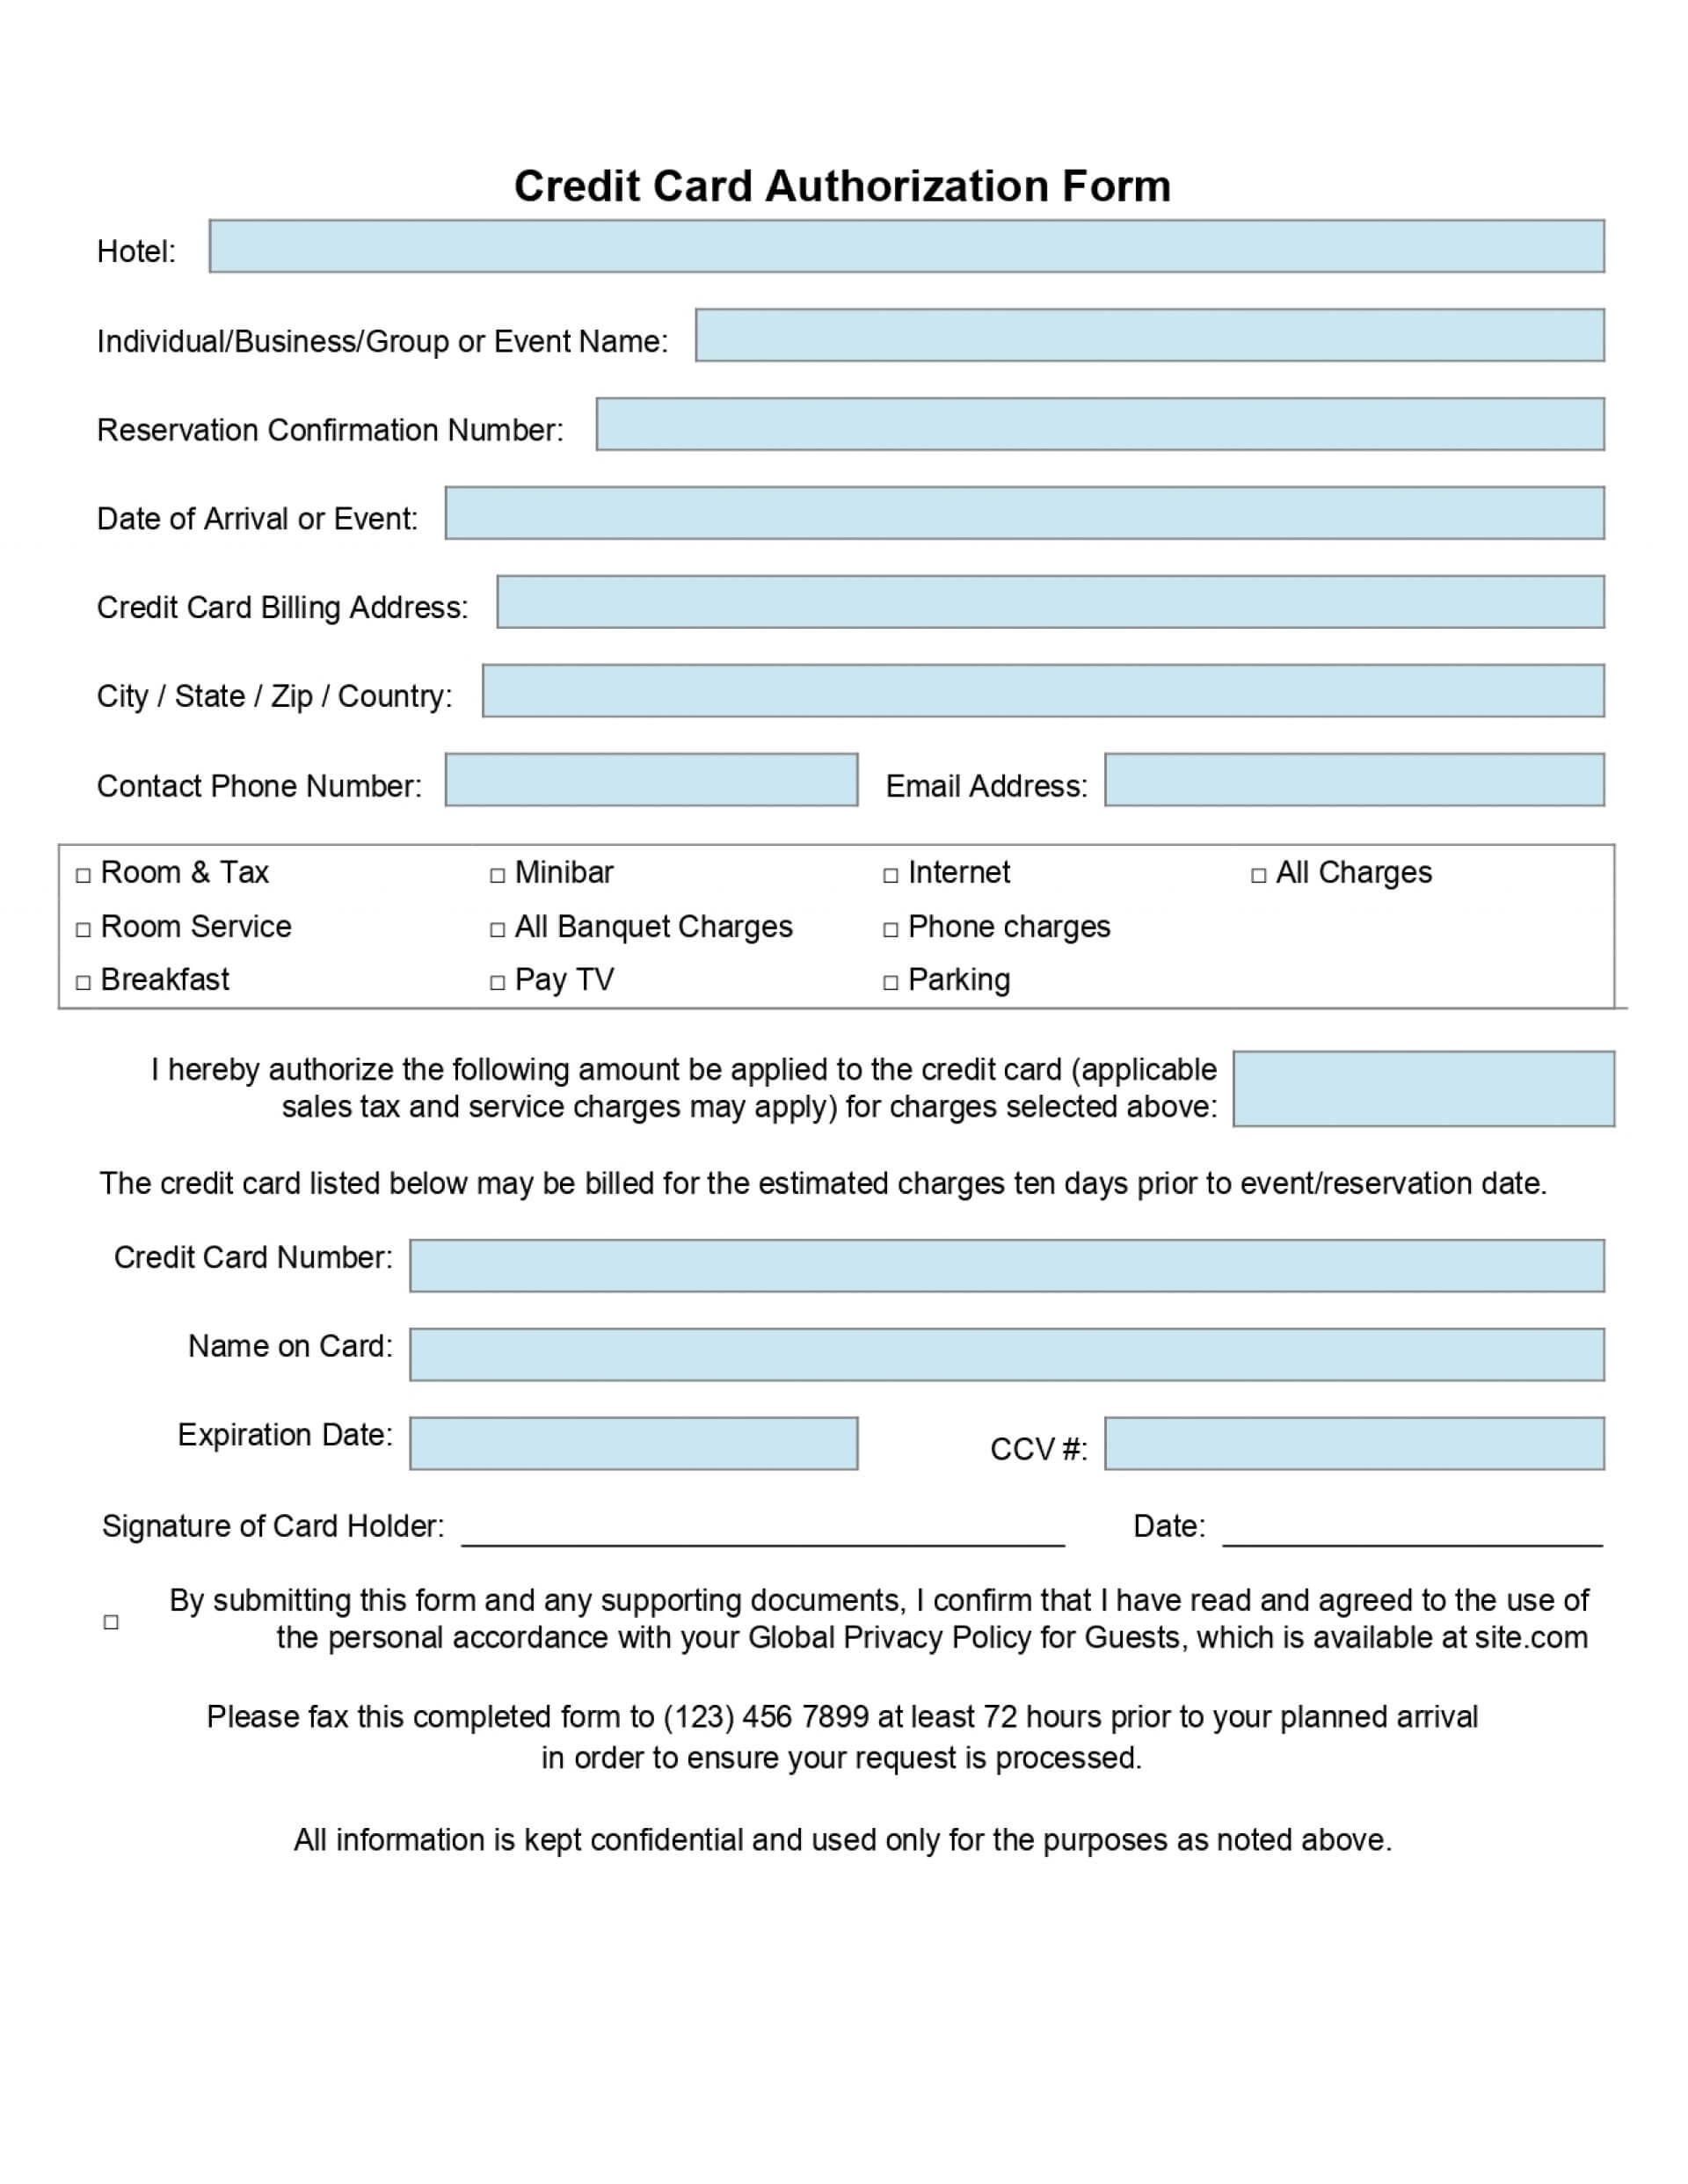 Credit Card Authorization Form Template For Hotel For Credit Card Privacy Policy Template